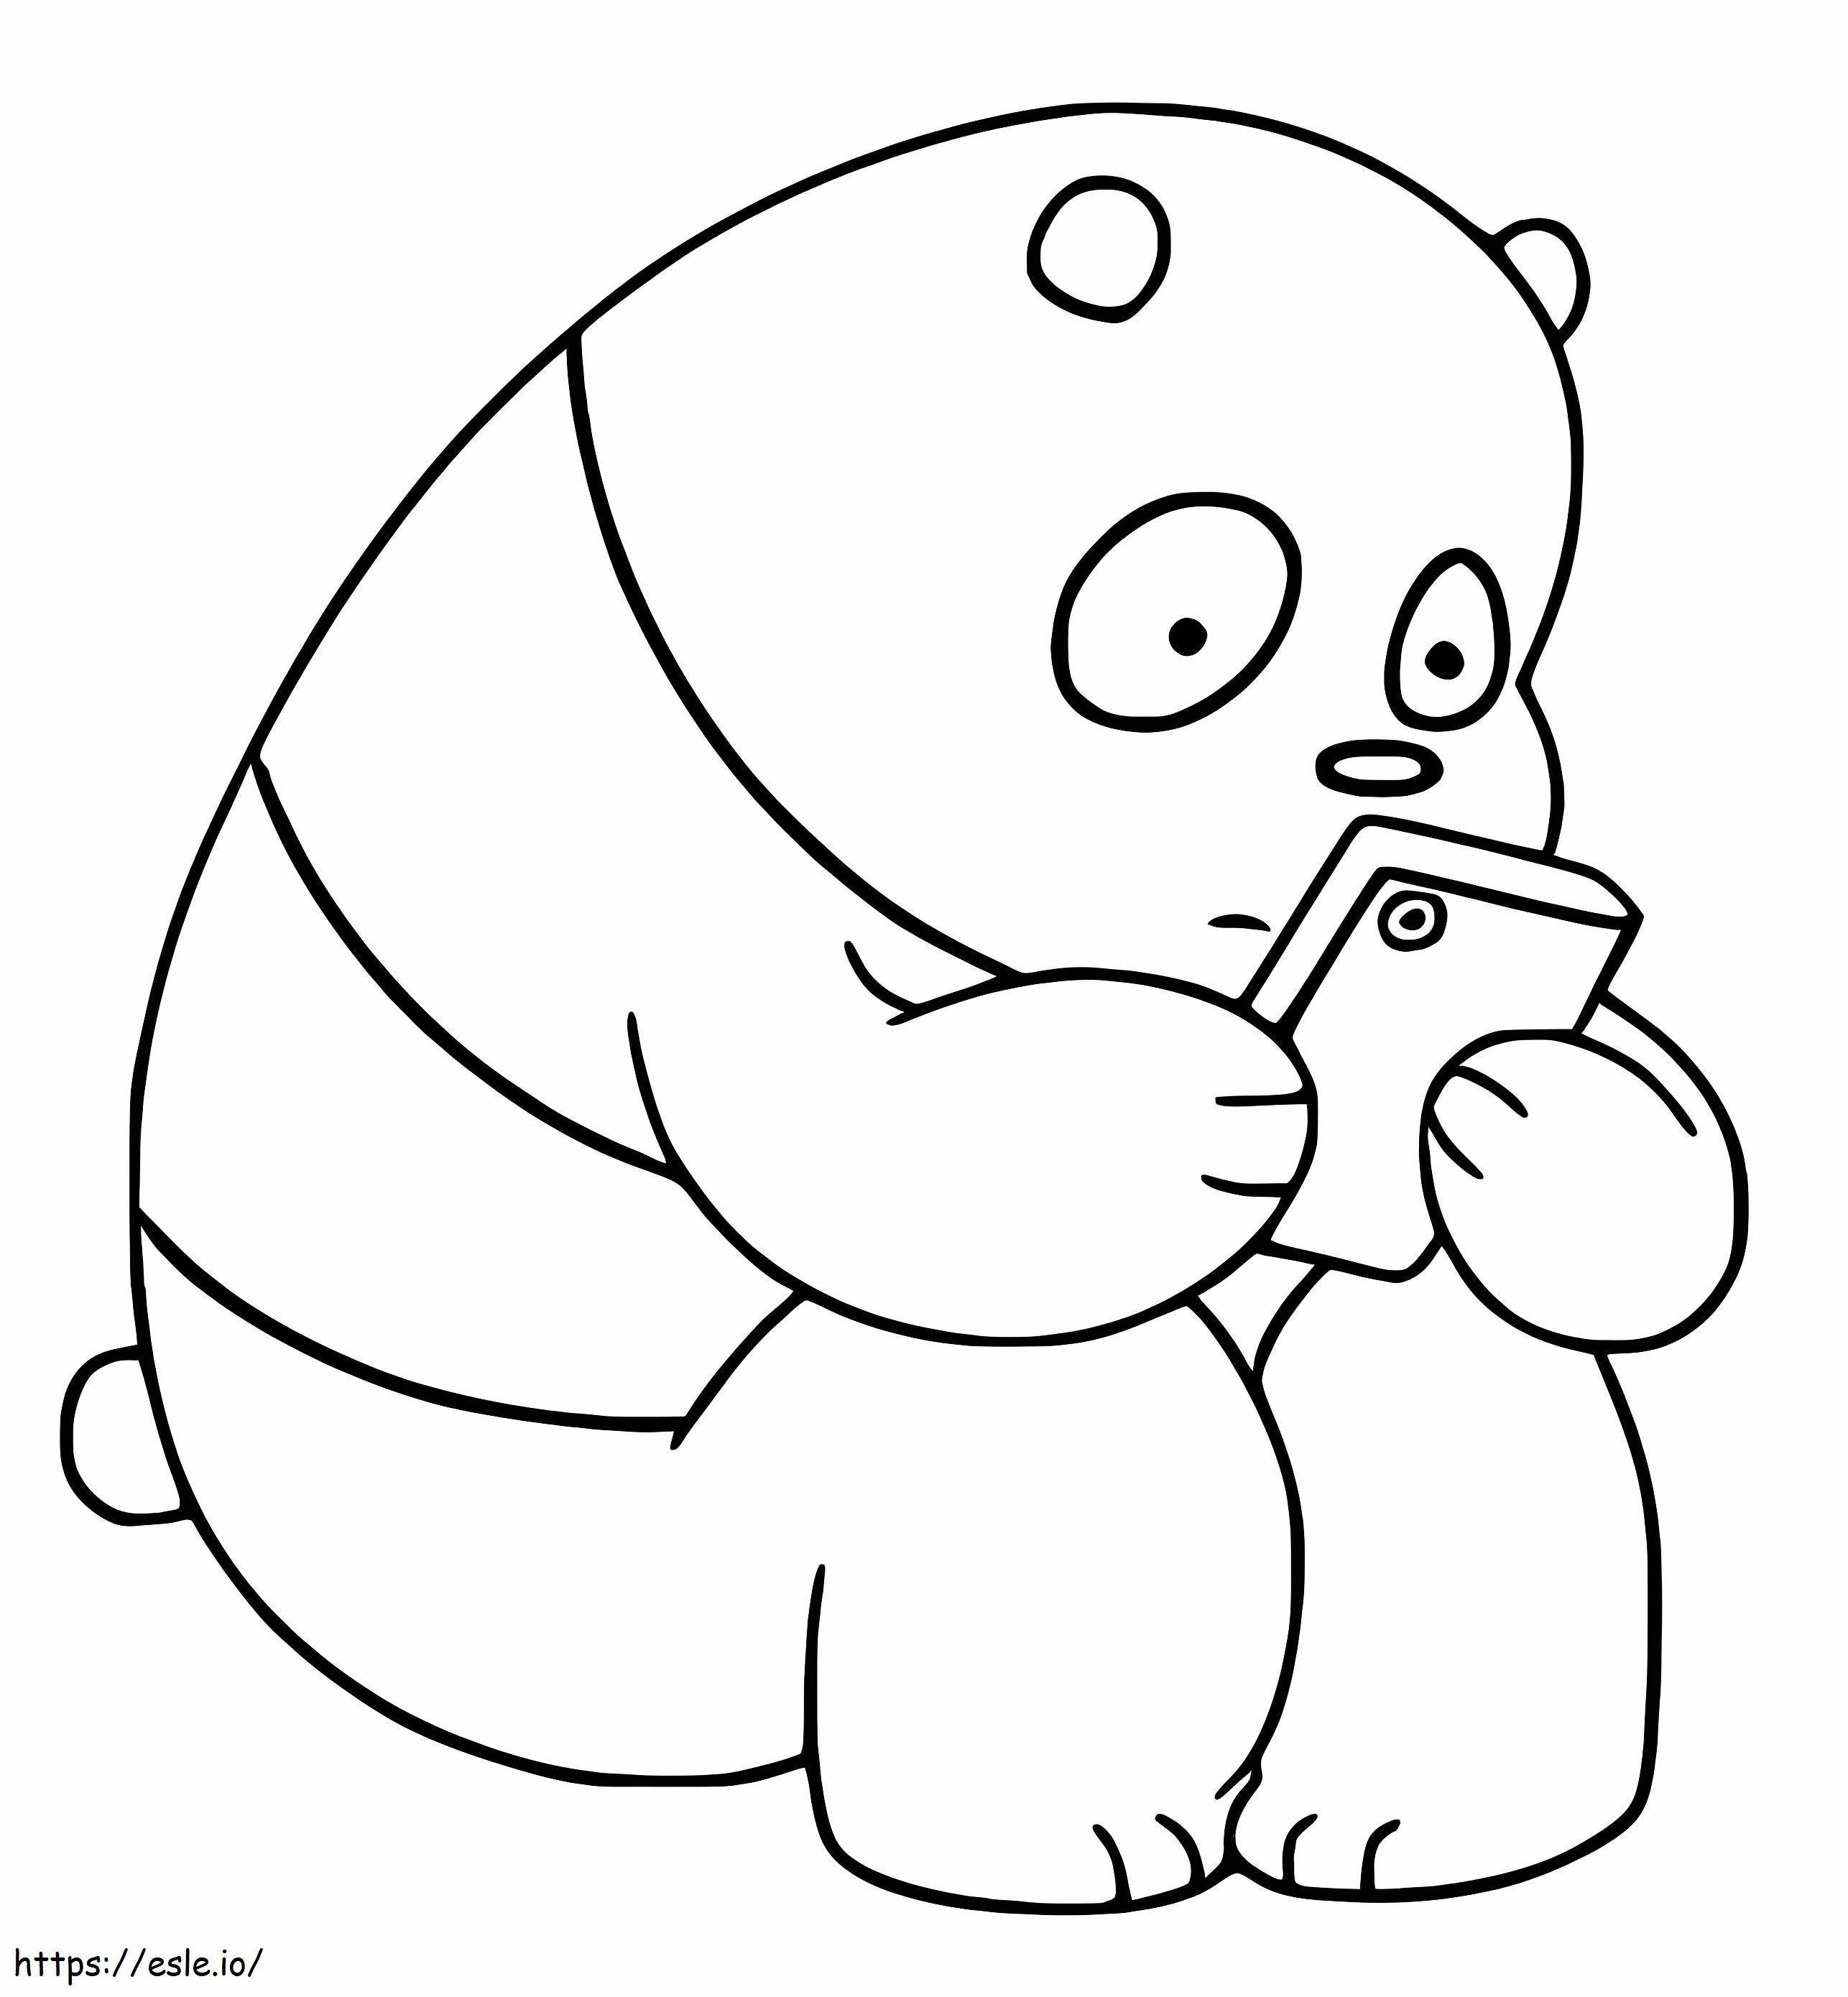 Panda Holding Smartphone coloring page